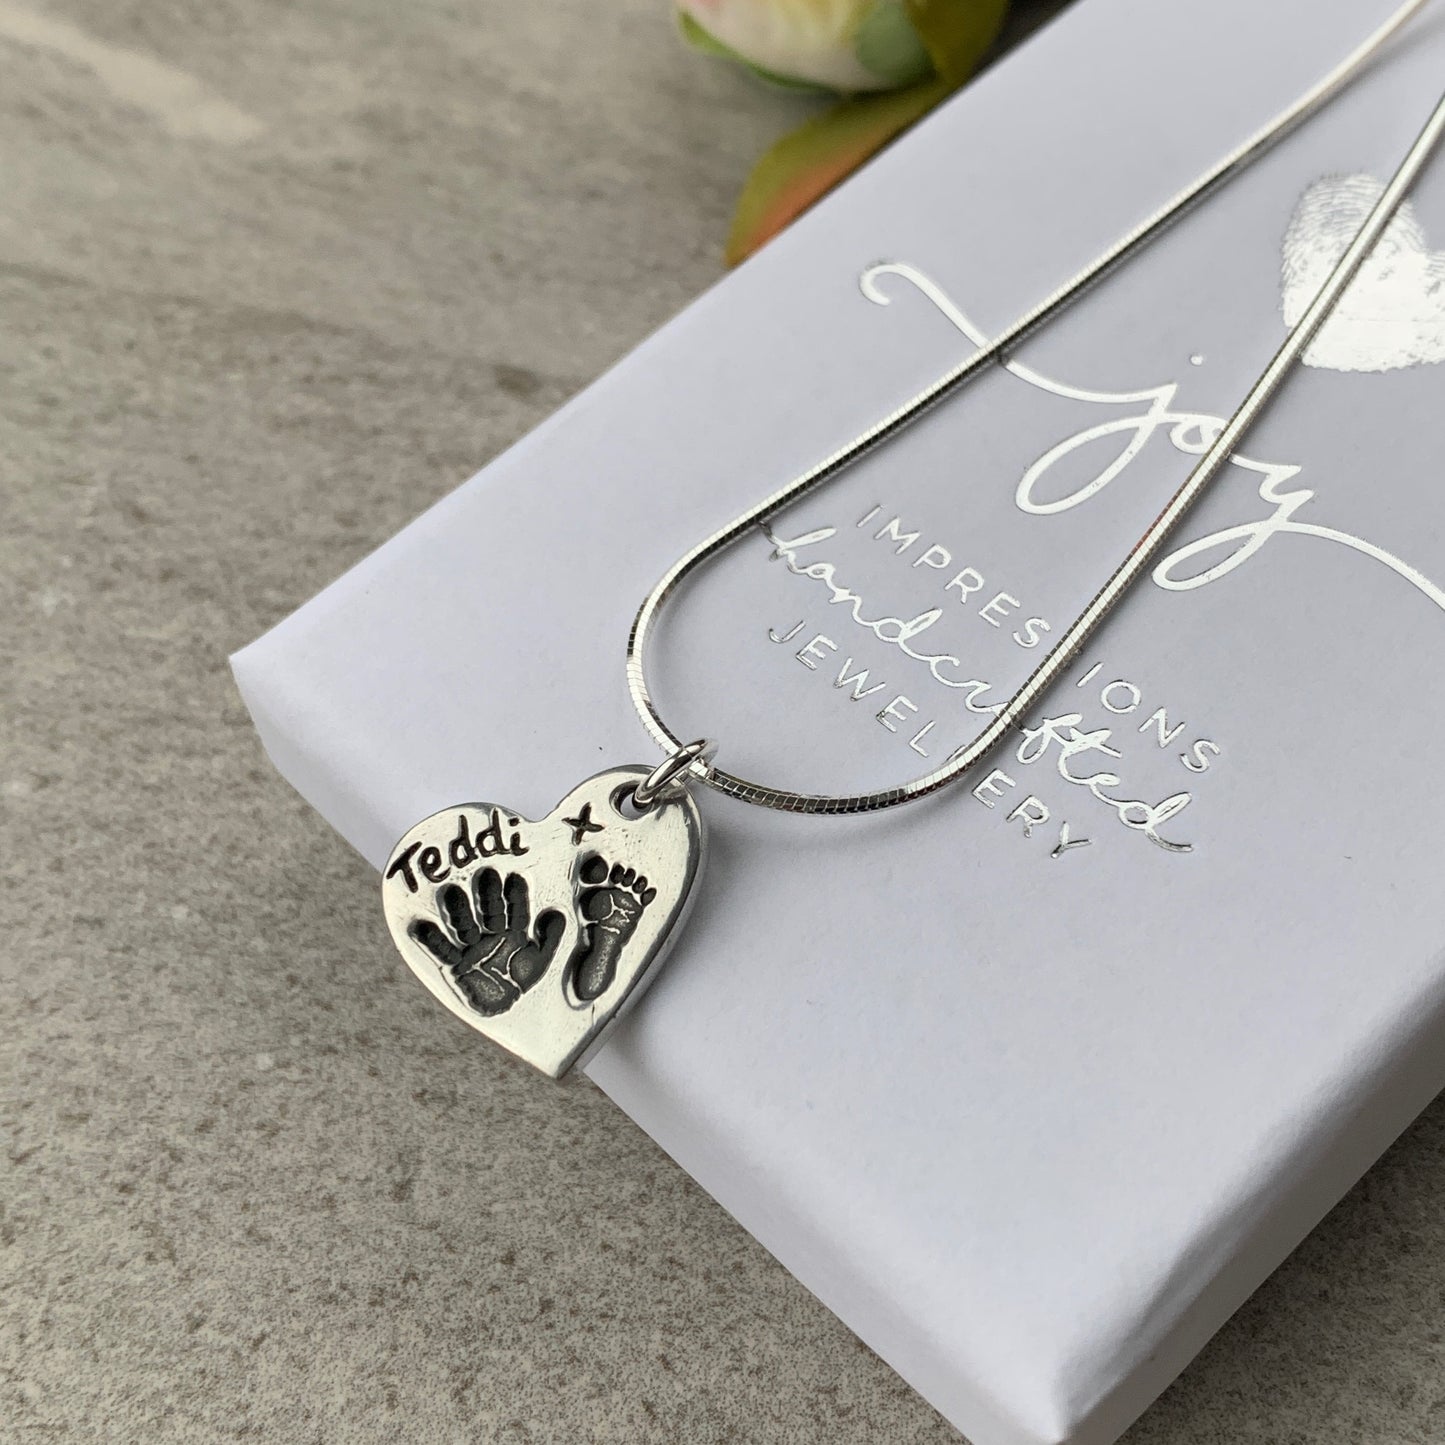 Hand and footprint charm necklace by Joy Impressions